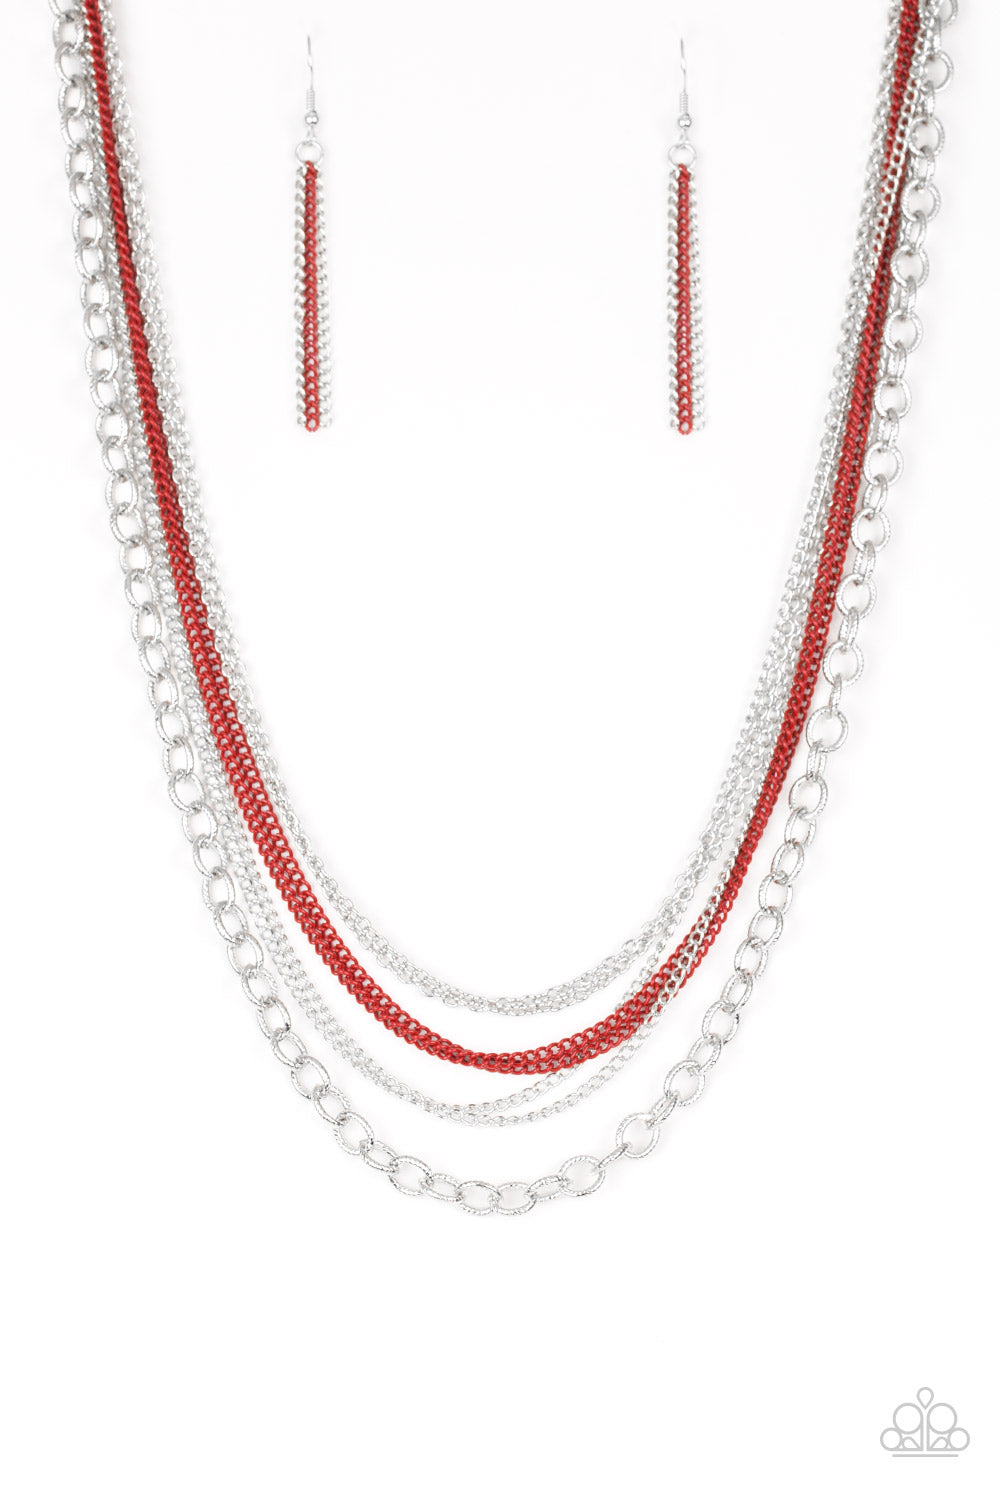 Intensely Industrial - red - Paparazzi necklace